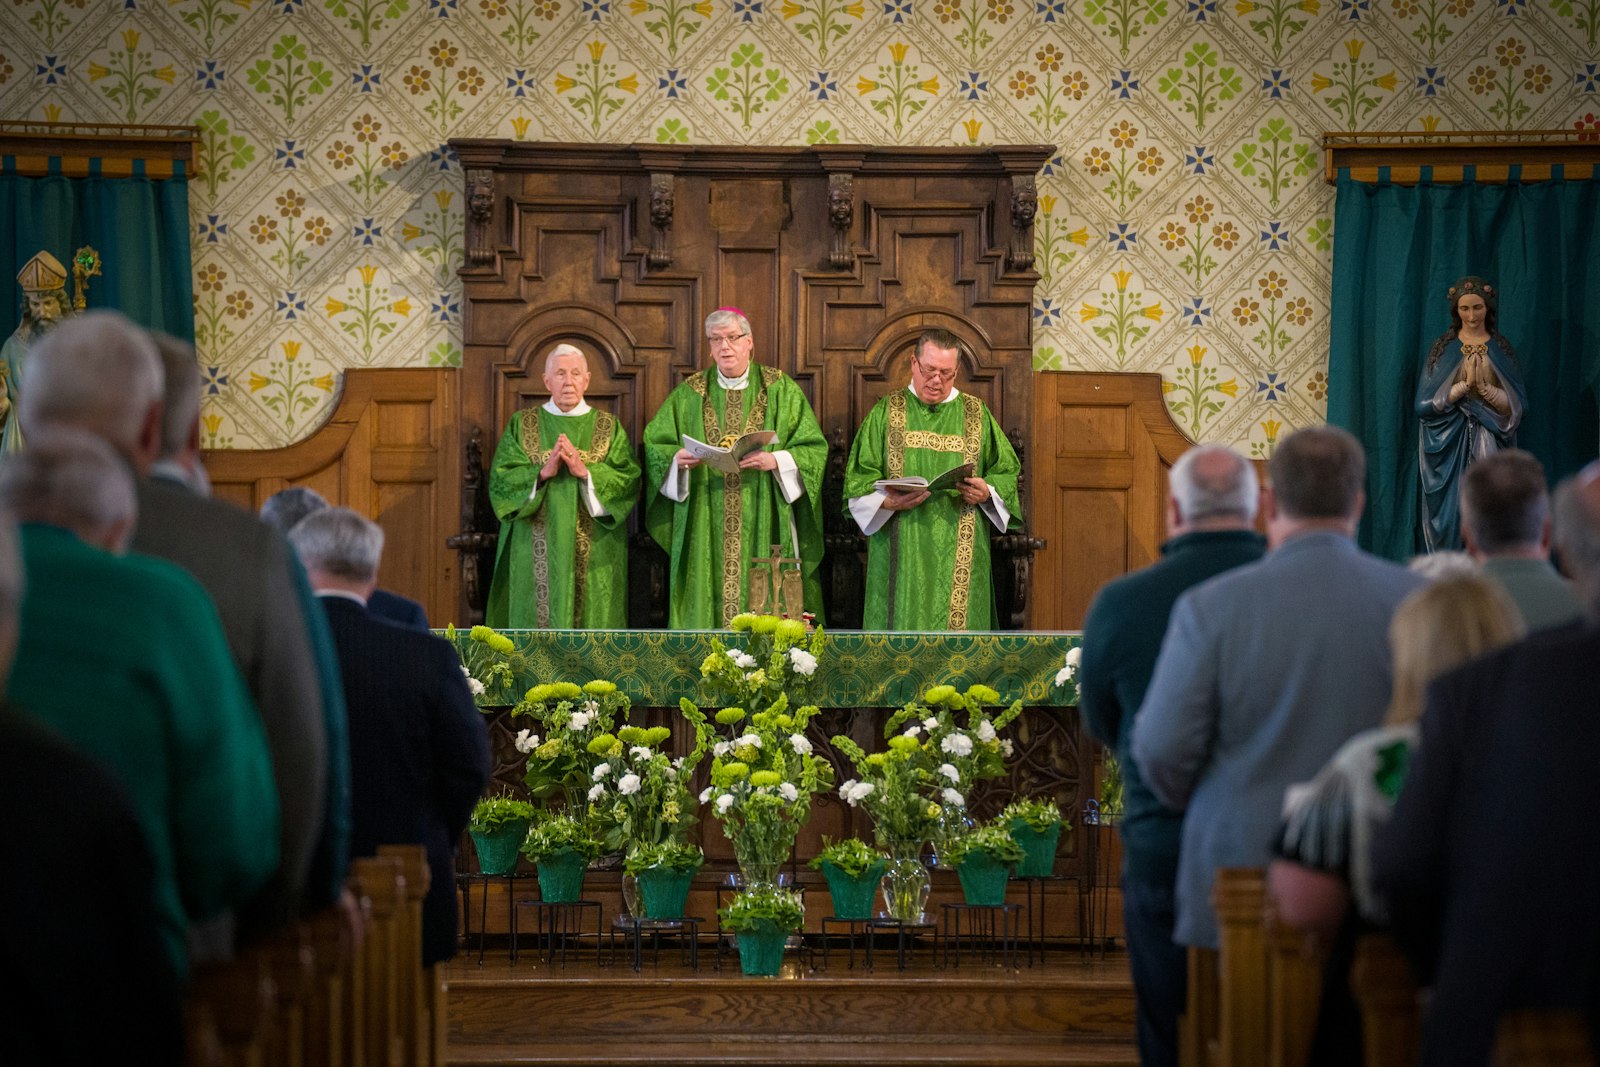 Auxiliary Bishop Gerard W. Battersby, whose ancestors hail from Belfast, Ireland, presides over the St. Patrick's Day Mass at Most Holy Trinity. The conversion of the Irish had a significant impact on the conversion of the rest of the world, Bishop Battersby said, as they emigrated to all corners of the globe, bringing the Gospel with them.